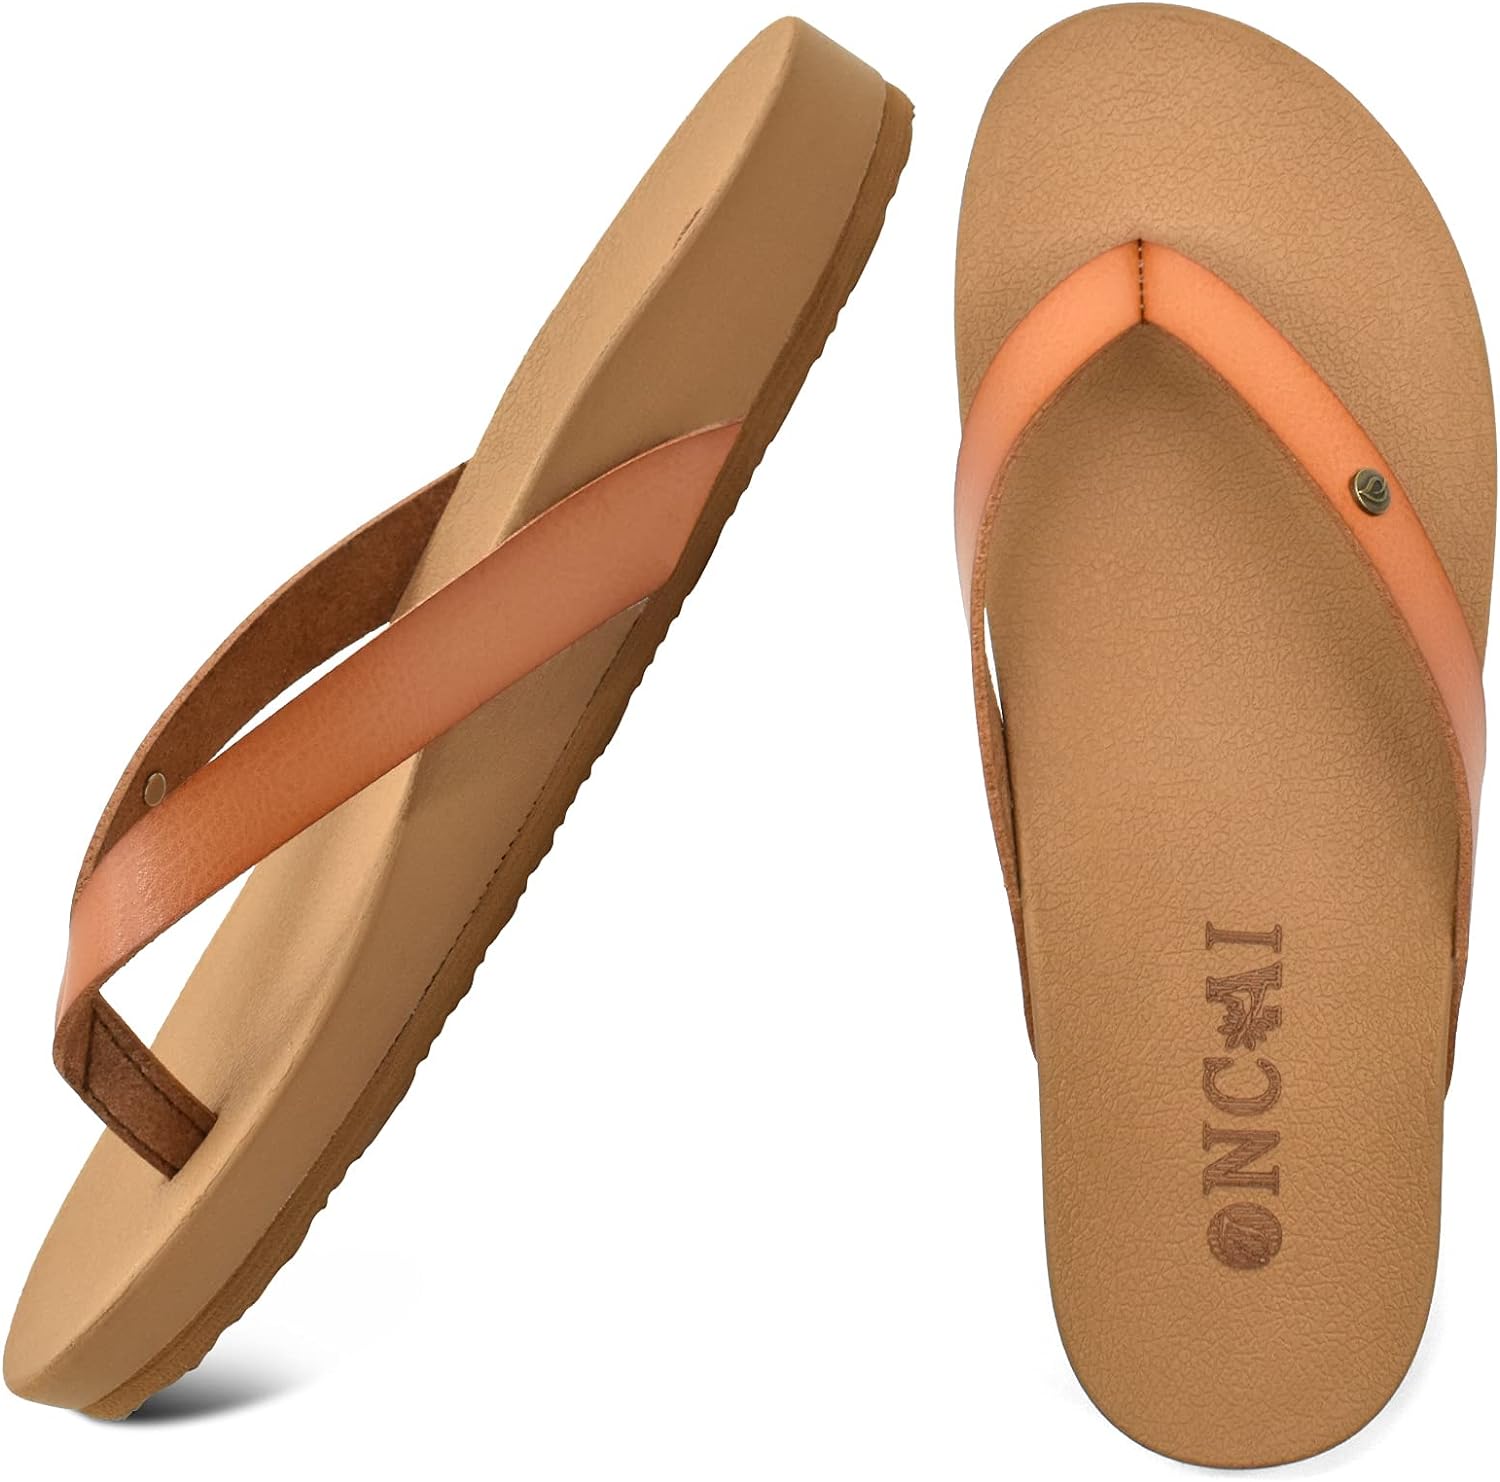 These flip flops are the most comfortable shoes I own.sizing accurate and foot support, arch and heel are perfect. Love stlye and color of leather. Recommend.